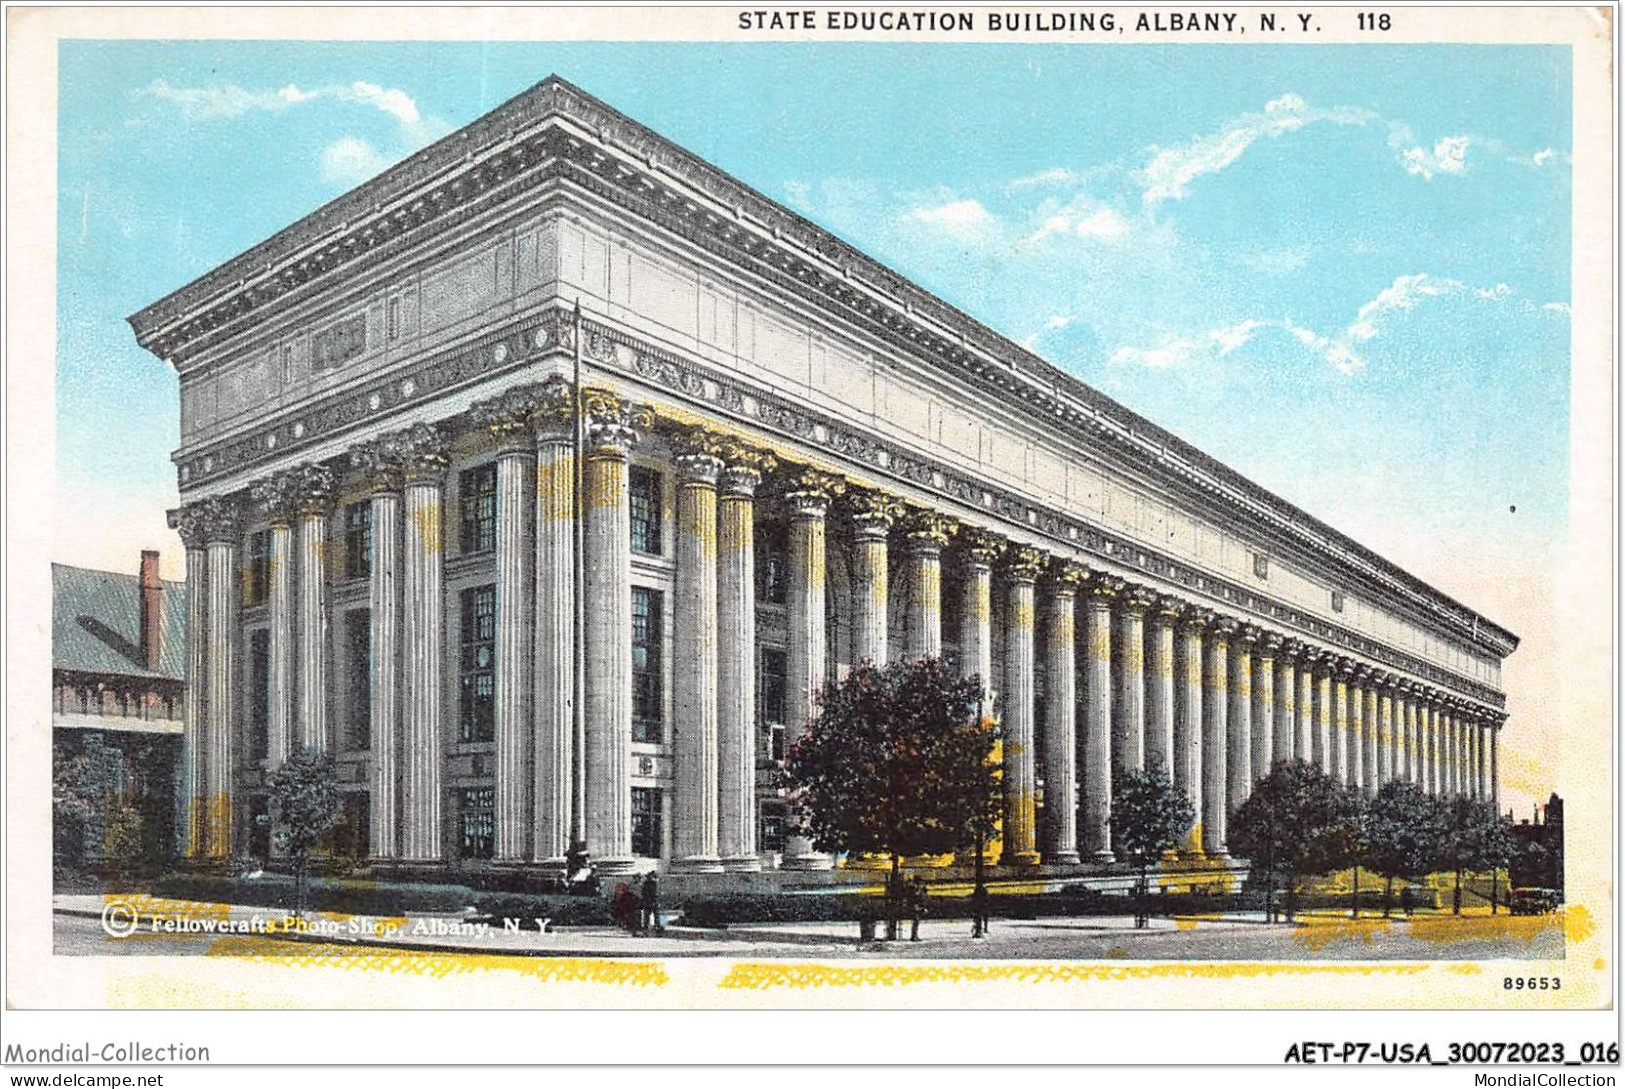 AETP7-USA-0530 - ALBANY - N Y - State Education Building - Albany